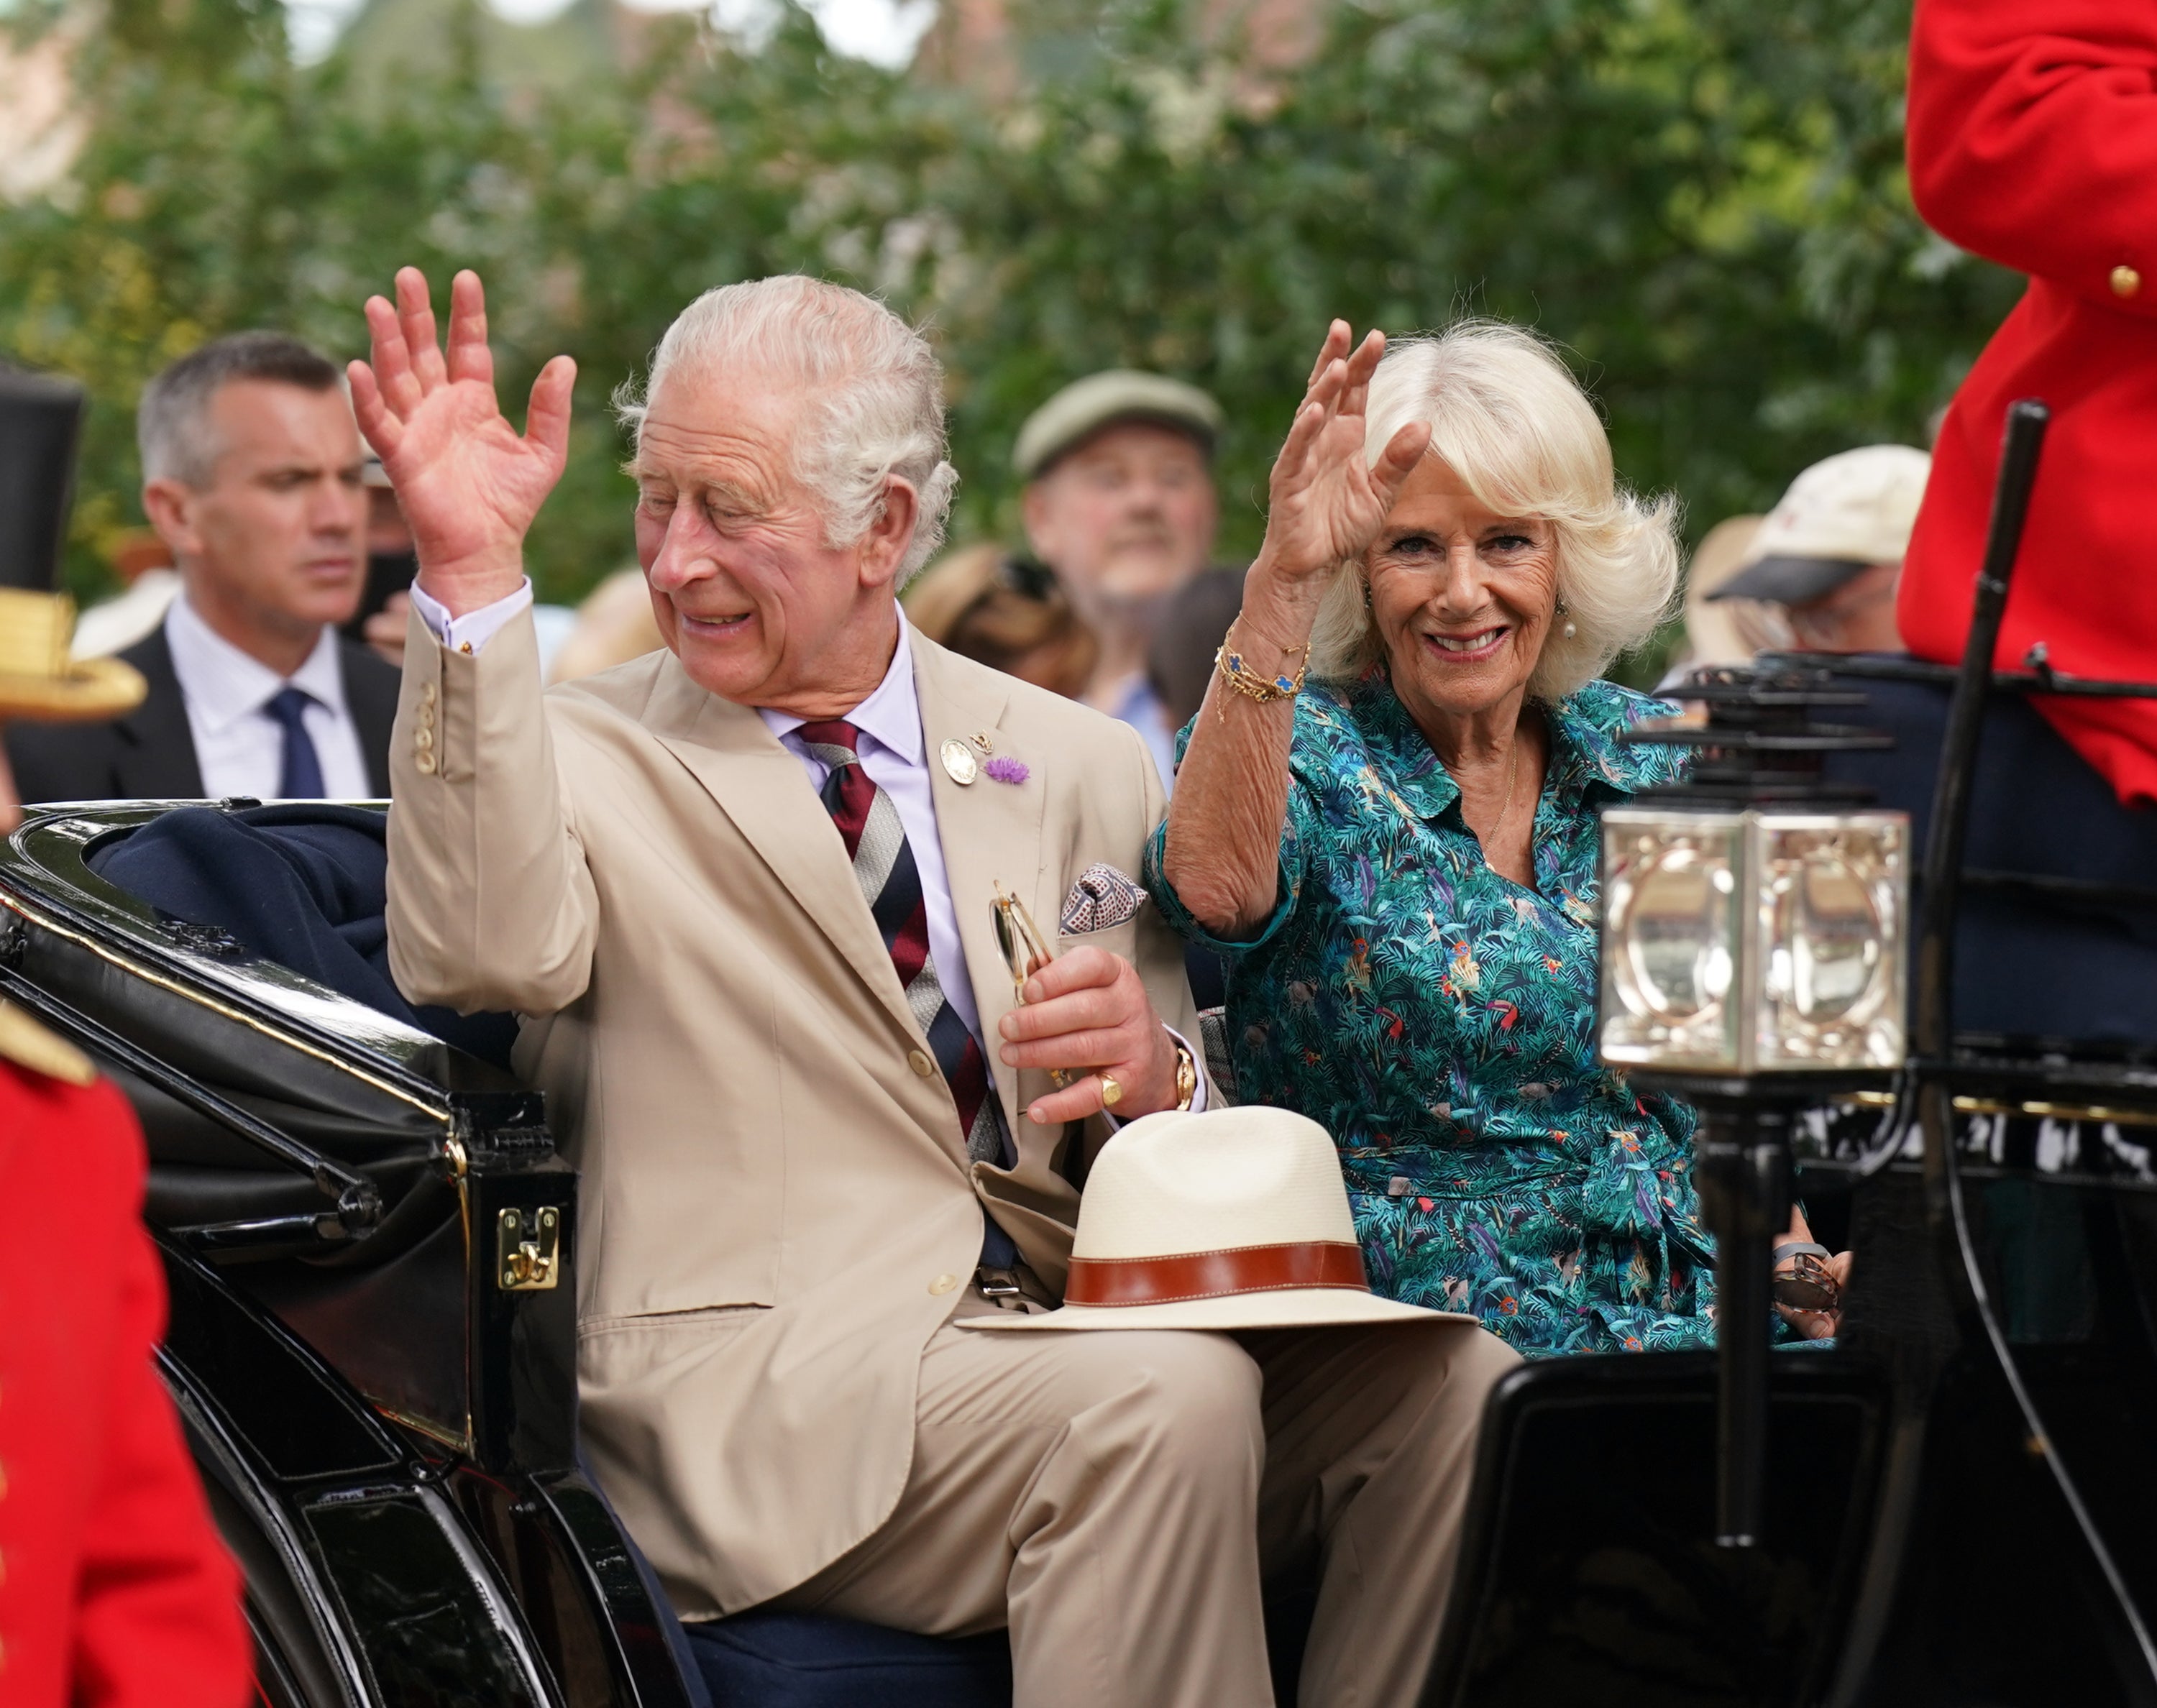 The royal visitors arrived in a horse-drawn carriage (Joe Giddens/PA)